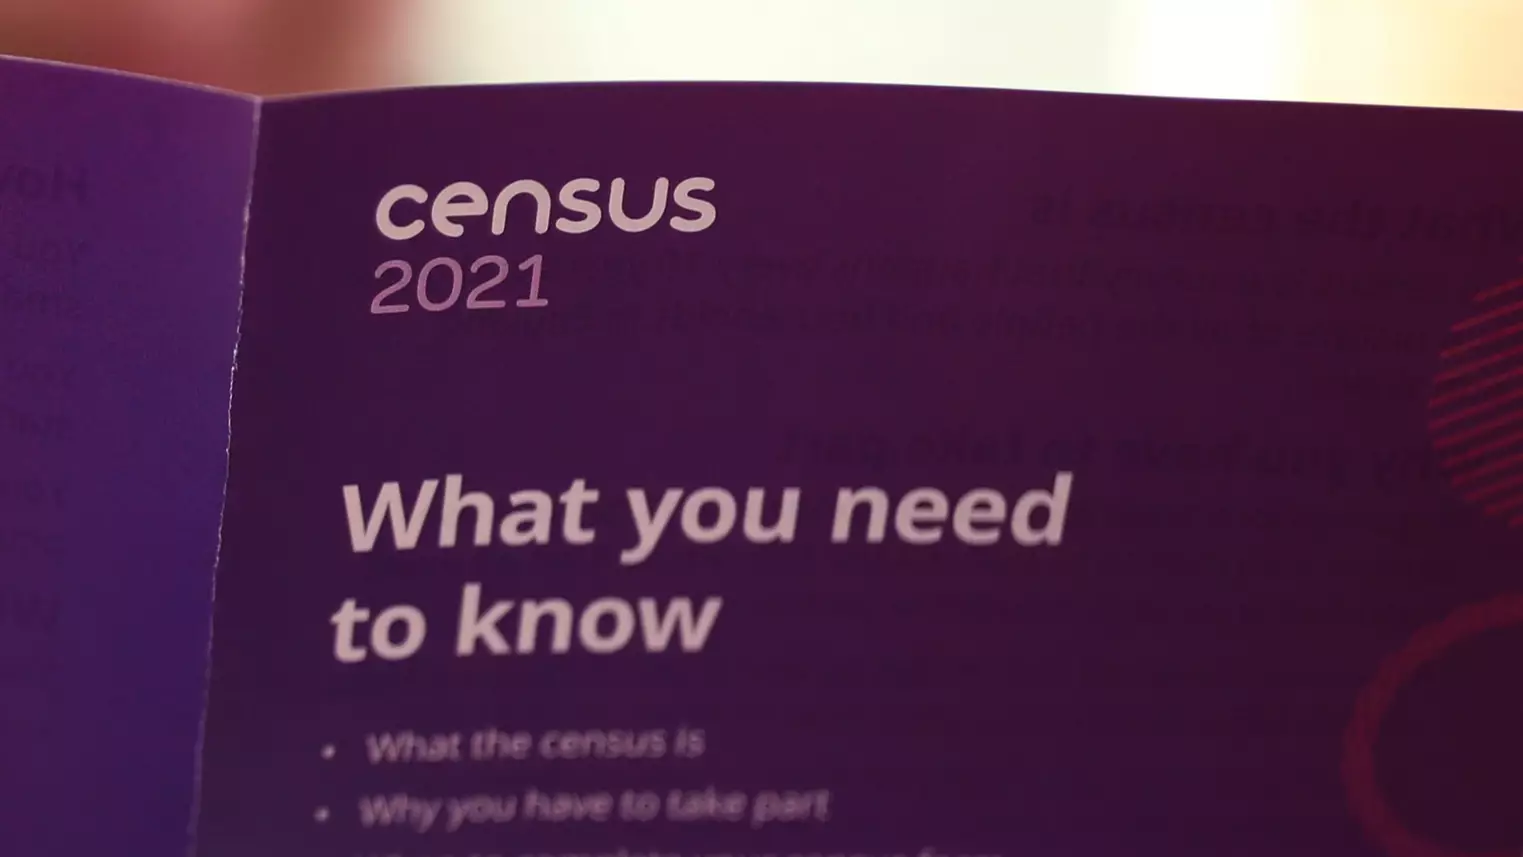 Conservative Group Says Australian Census Is Too 'Woke' And Is Trying To 'Cancel' Religion